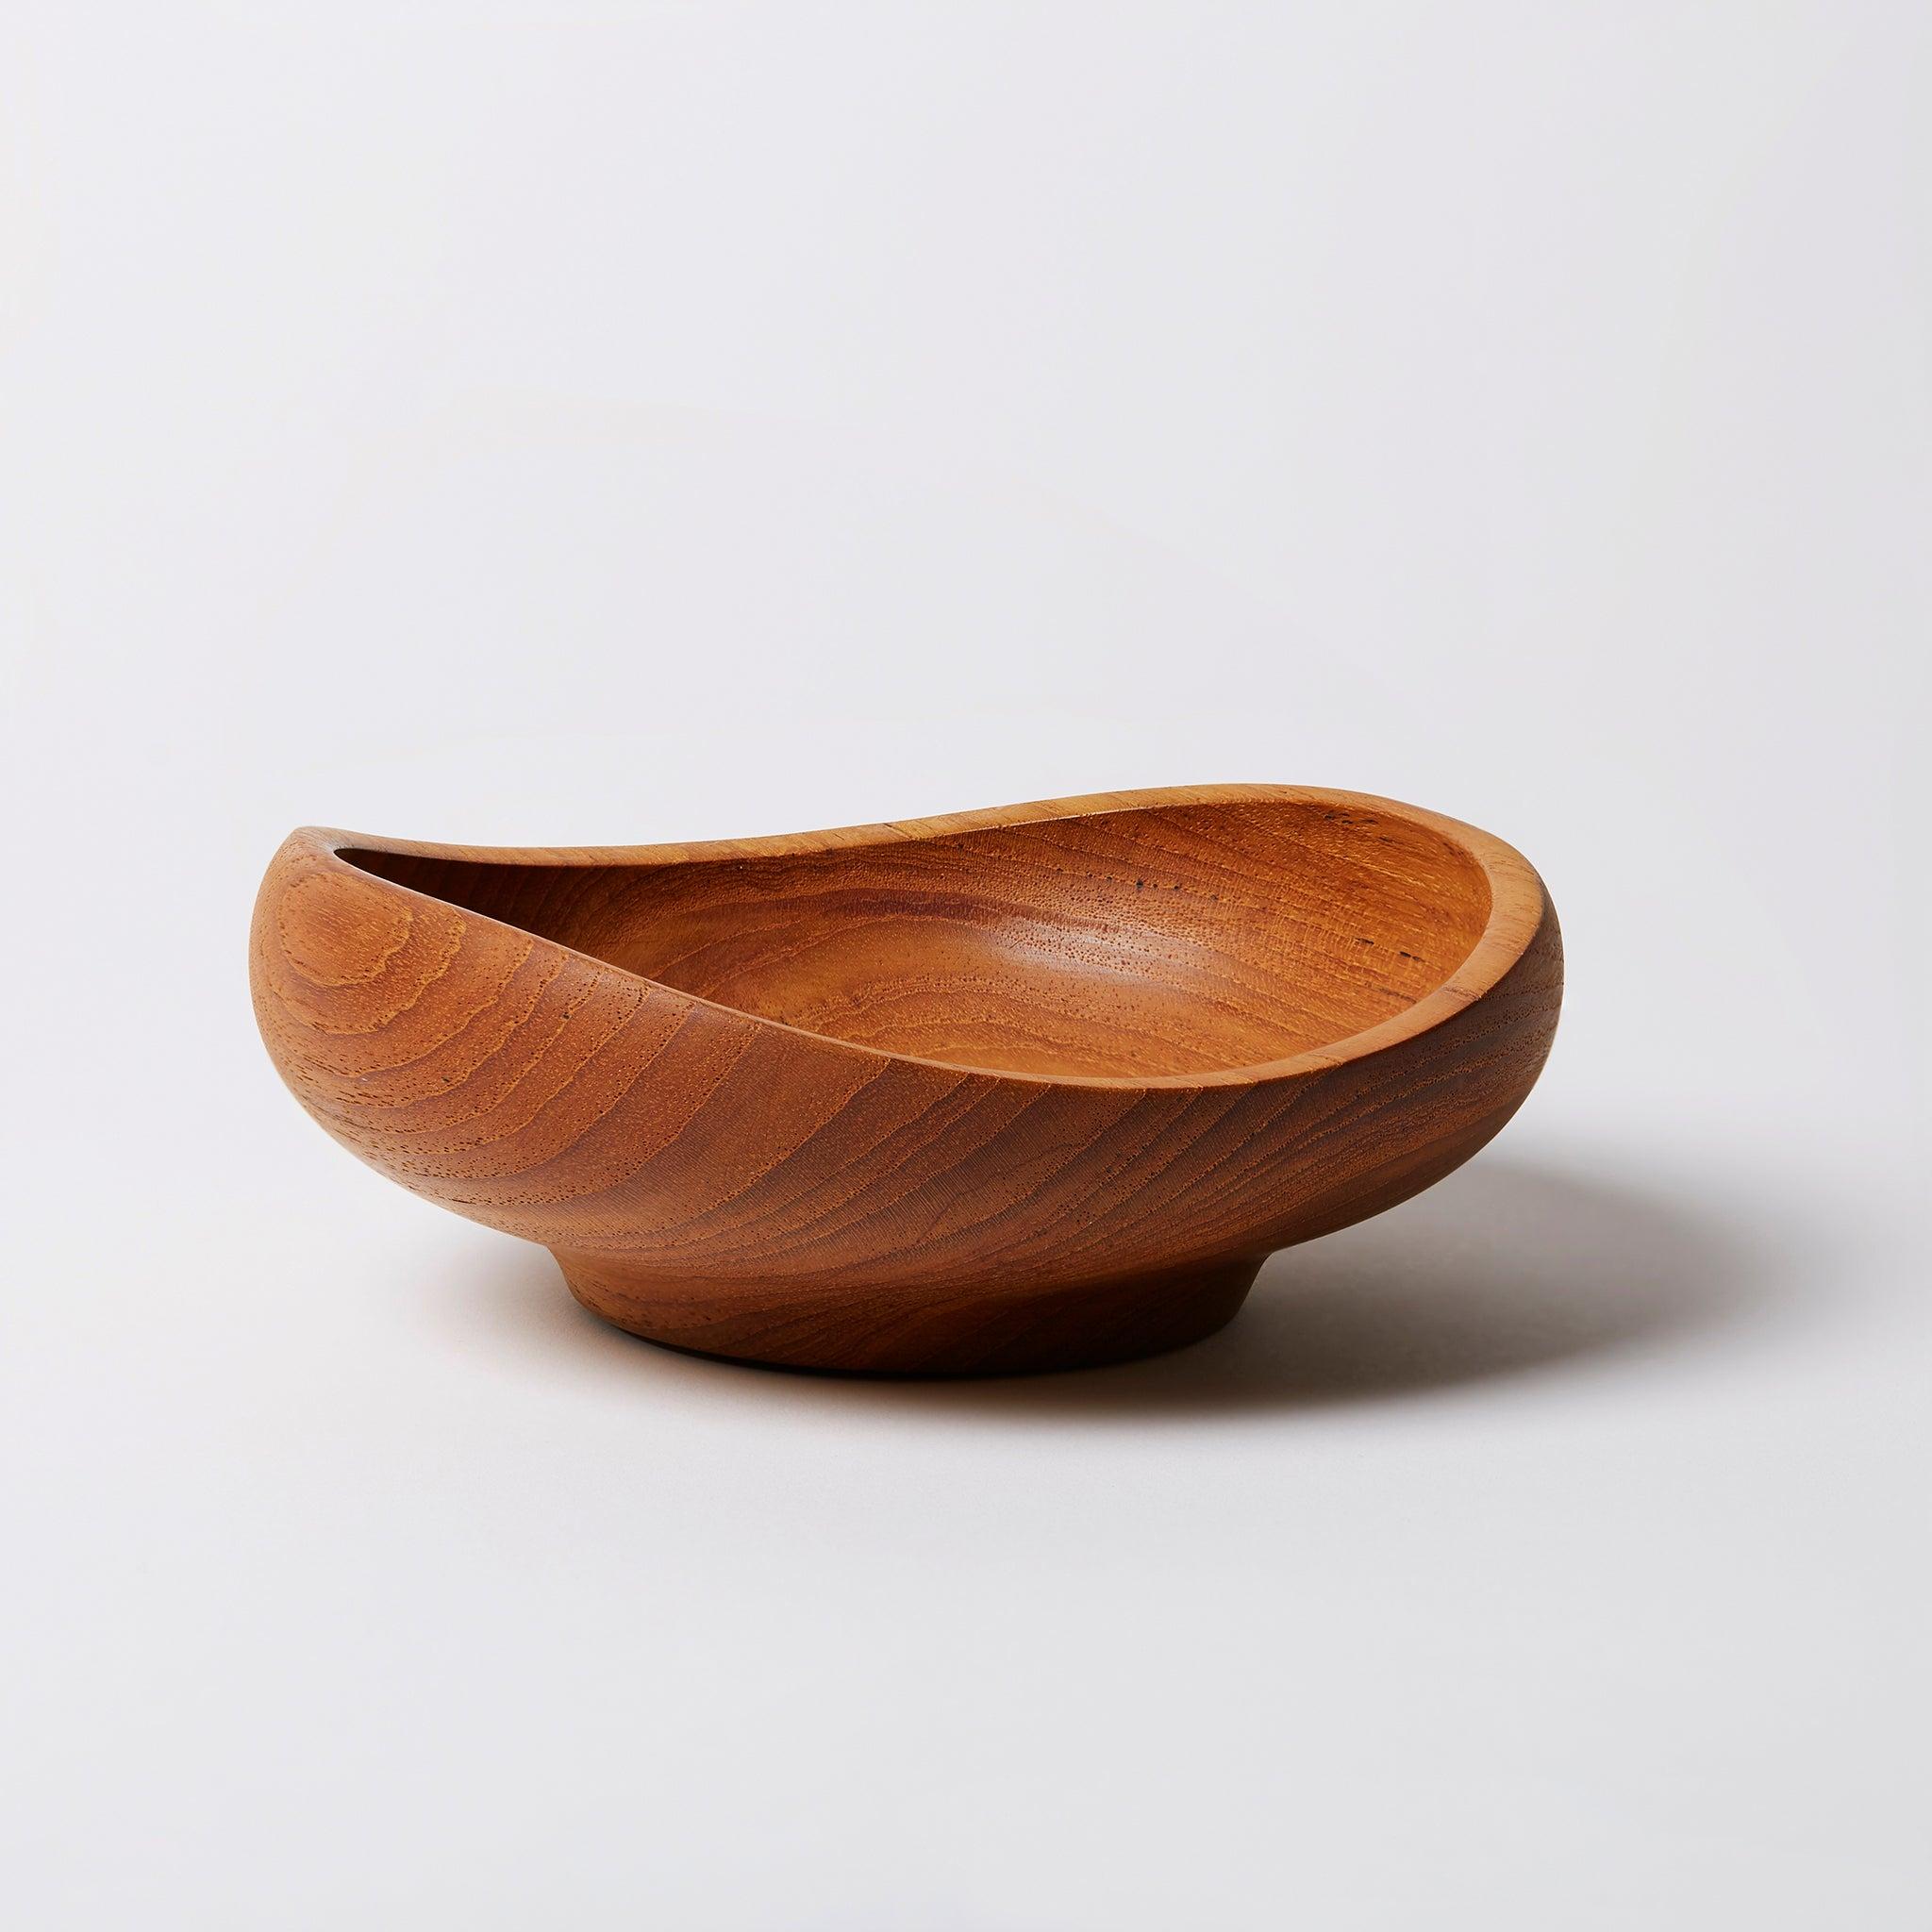 With his sculptural approach to design and his inspiration from art, Finn Juhl created a selection of delicate hand turned wooden bowls in 1951. They represent Finn Juhl’s design aesthetic in its purest form. The organic shapes and warm teak